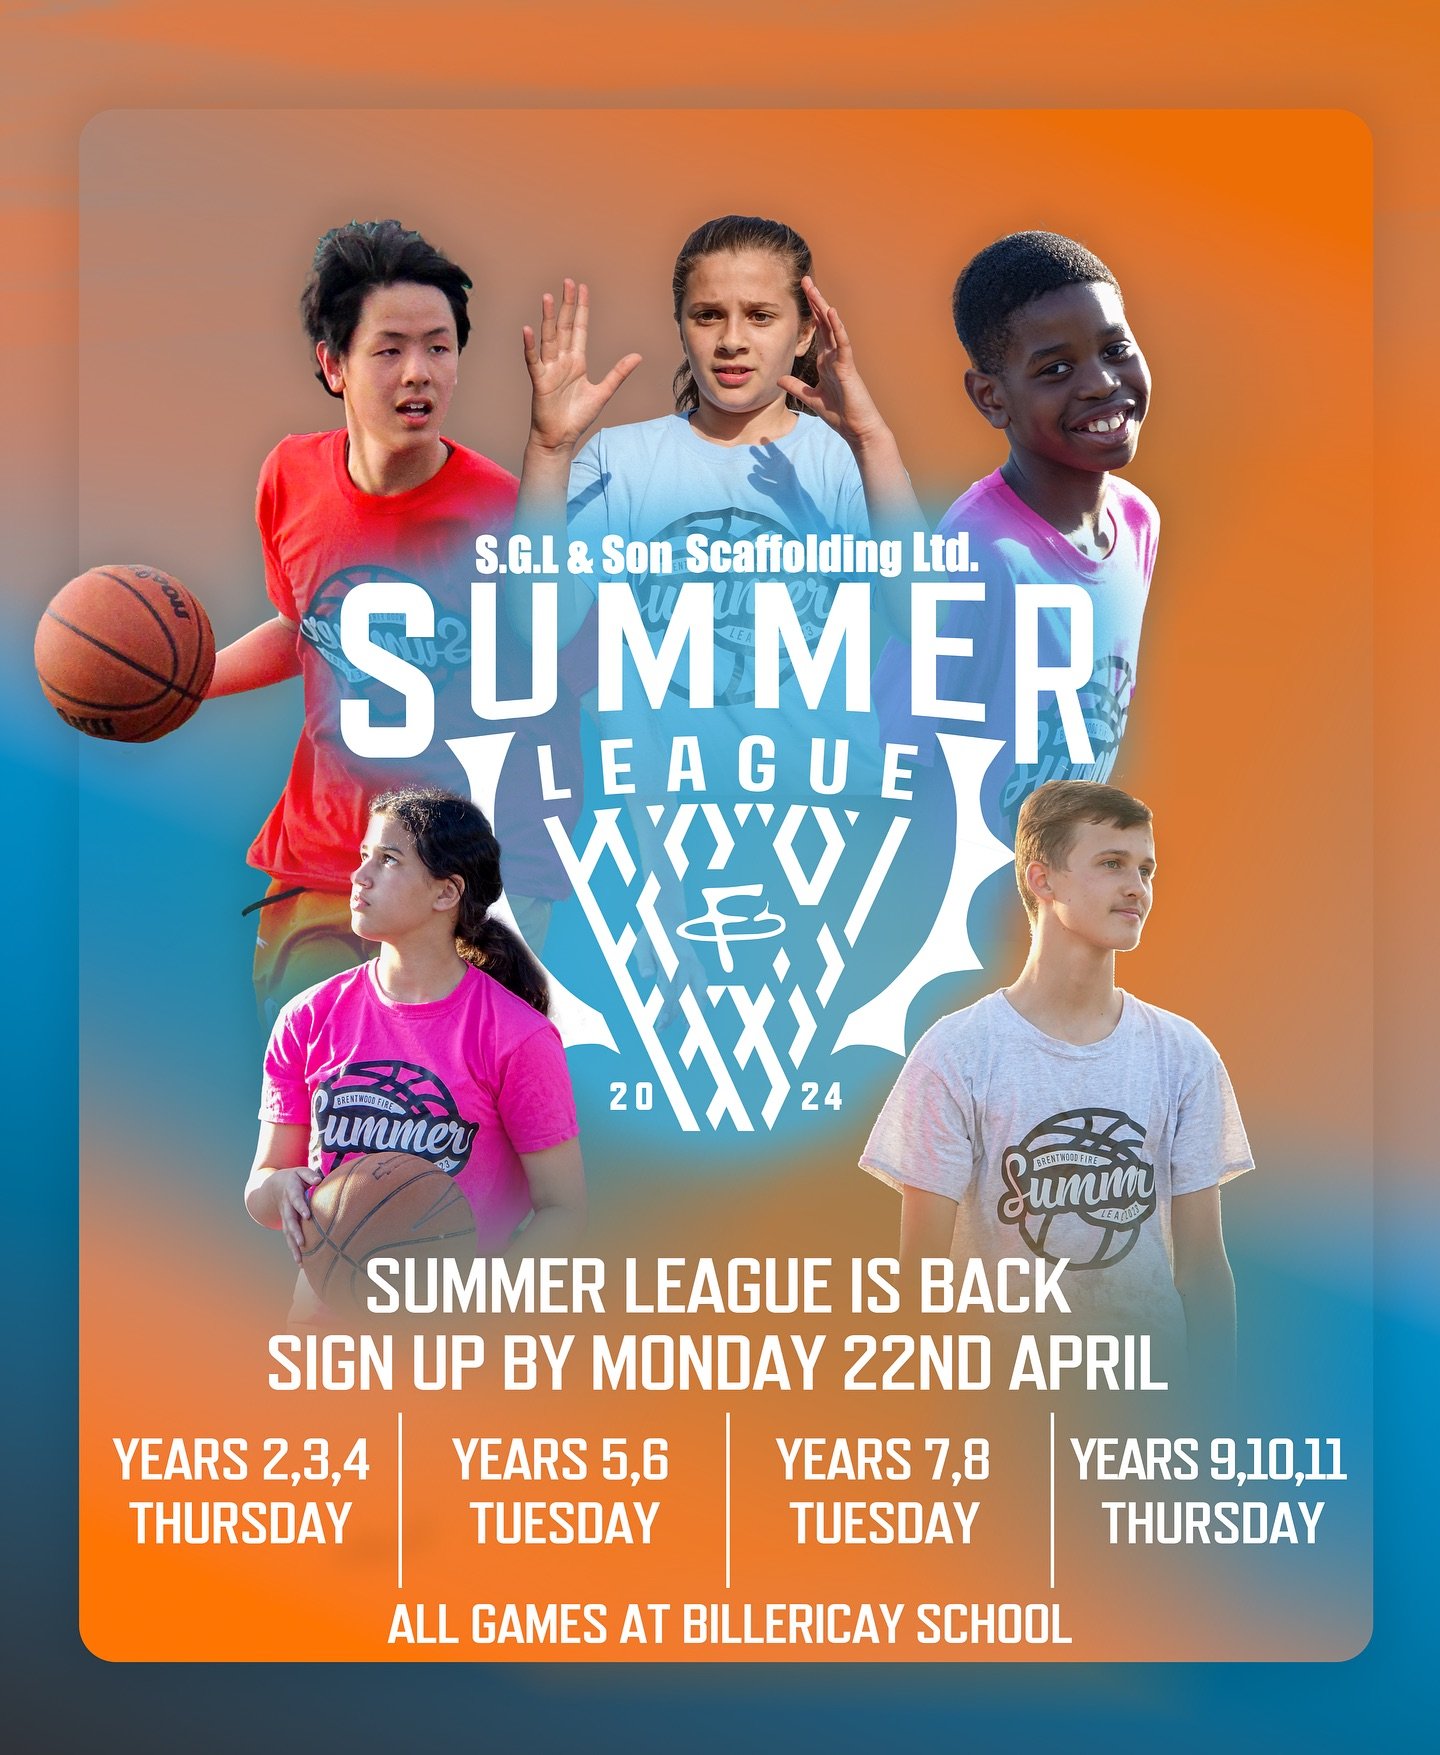 Sign Up is Live for Summer League 2024

Thank you to @sgl_and_son_scaffolding_ltd for sponsoring this years League. 

Secure your place by signing up before April 22nd - Link in bio 

&bull; Years 2,3,4 - Thursdays 5:15pm

&bull; Years 5,6 - Tuesdays